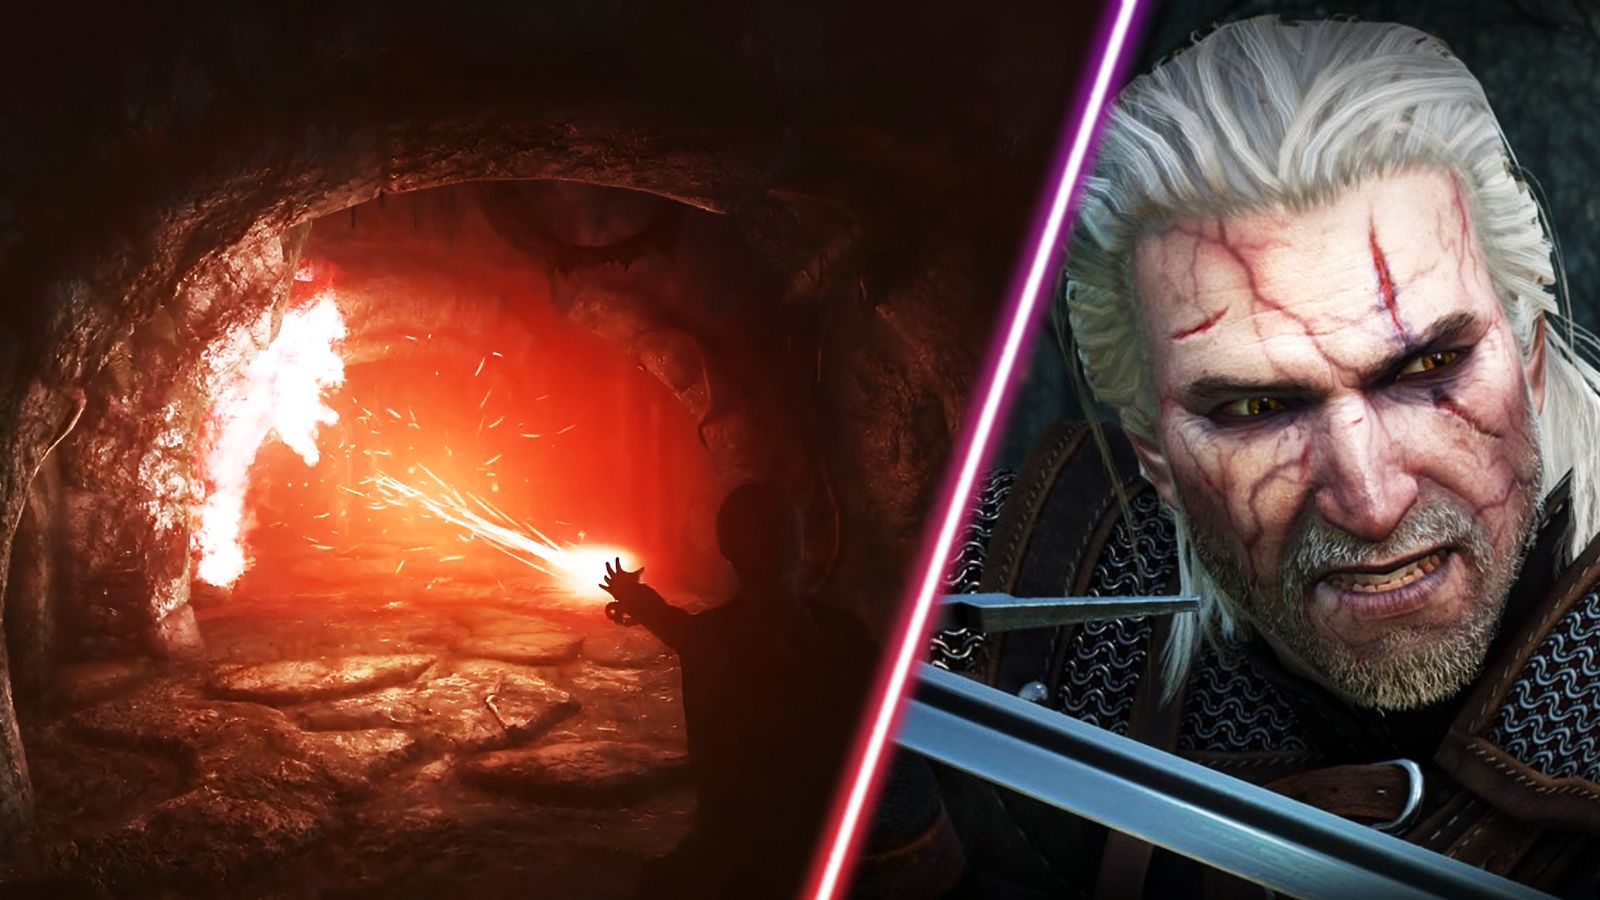 The Witcher 3's Geralt alongside a sign being cast in Skyrim.